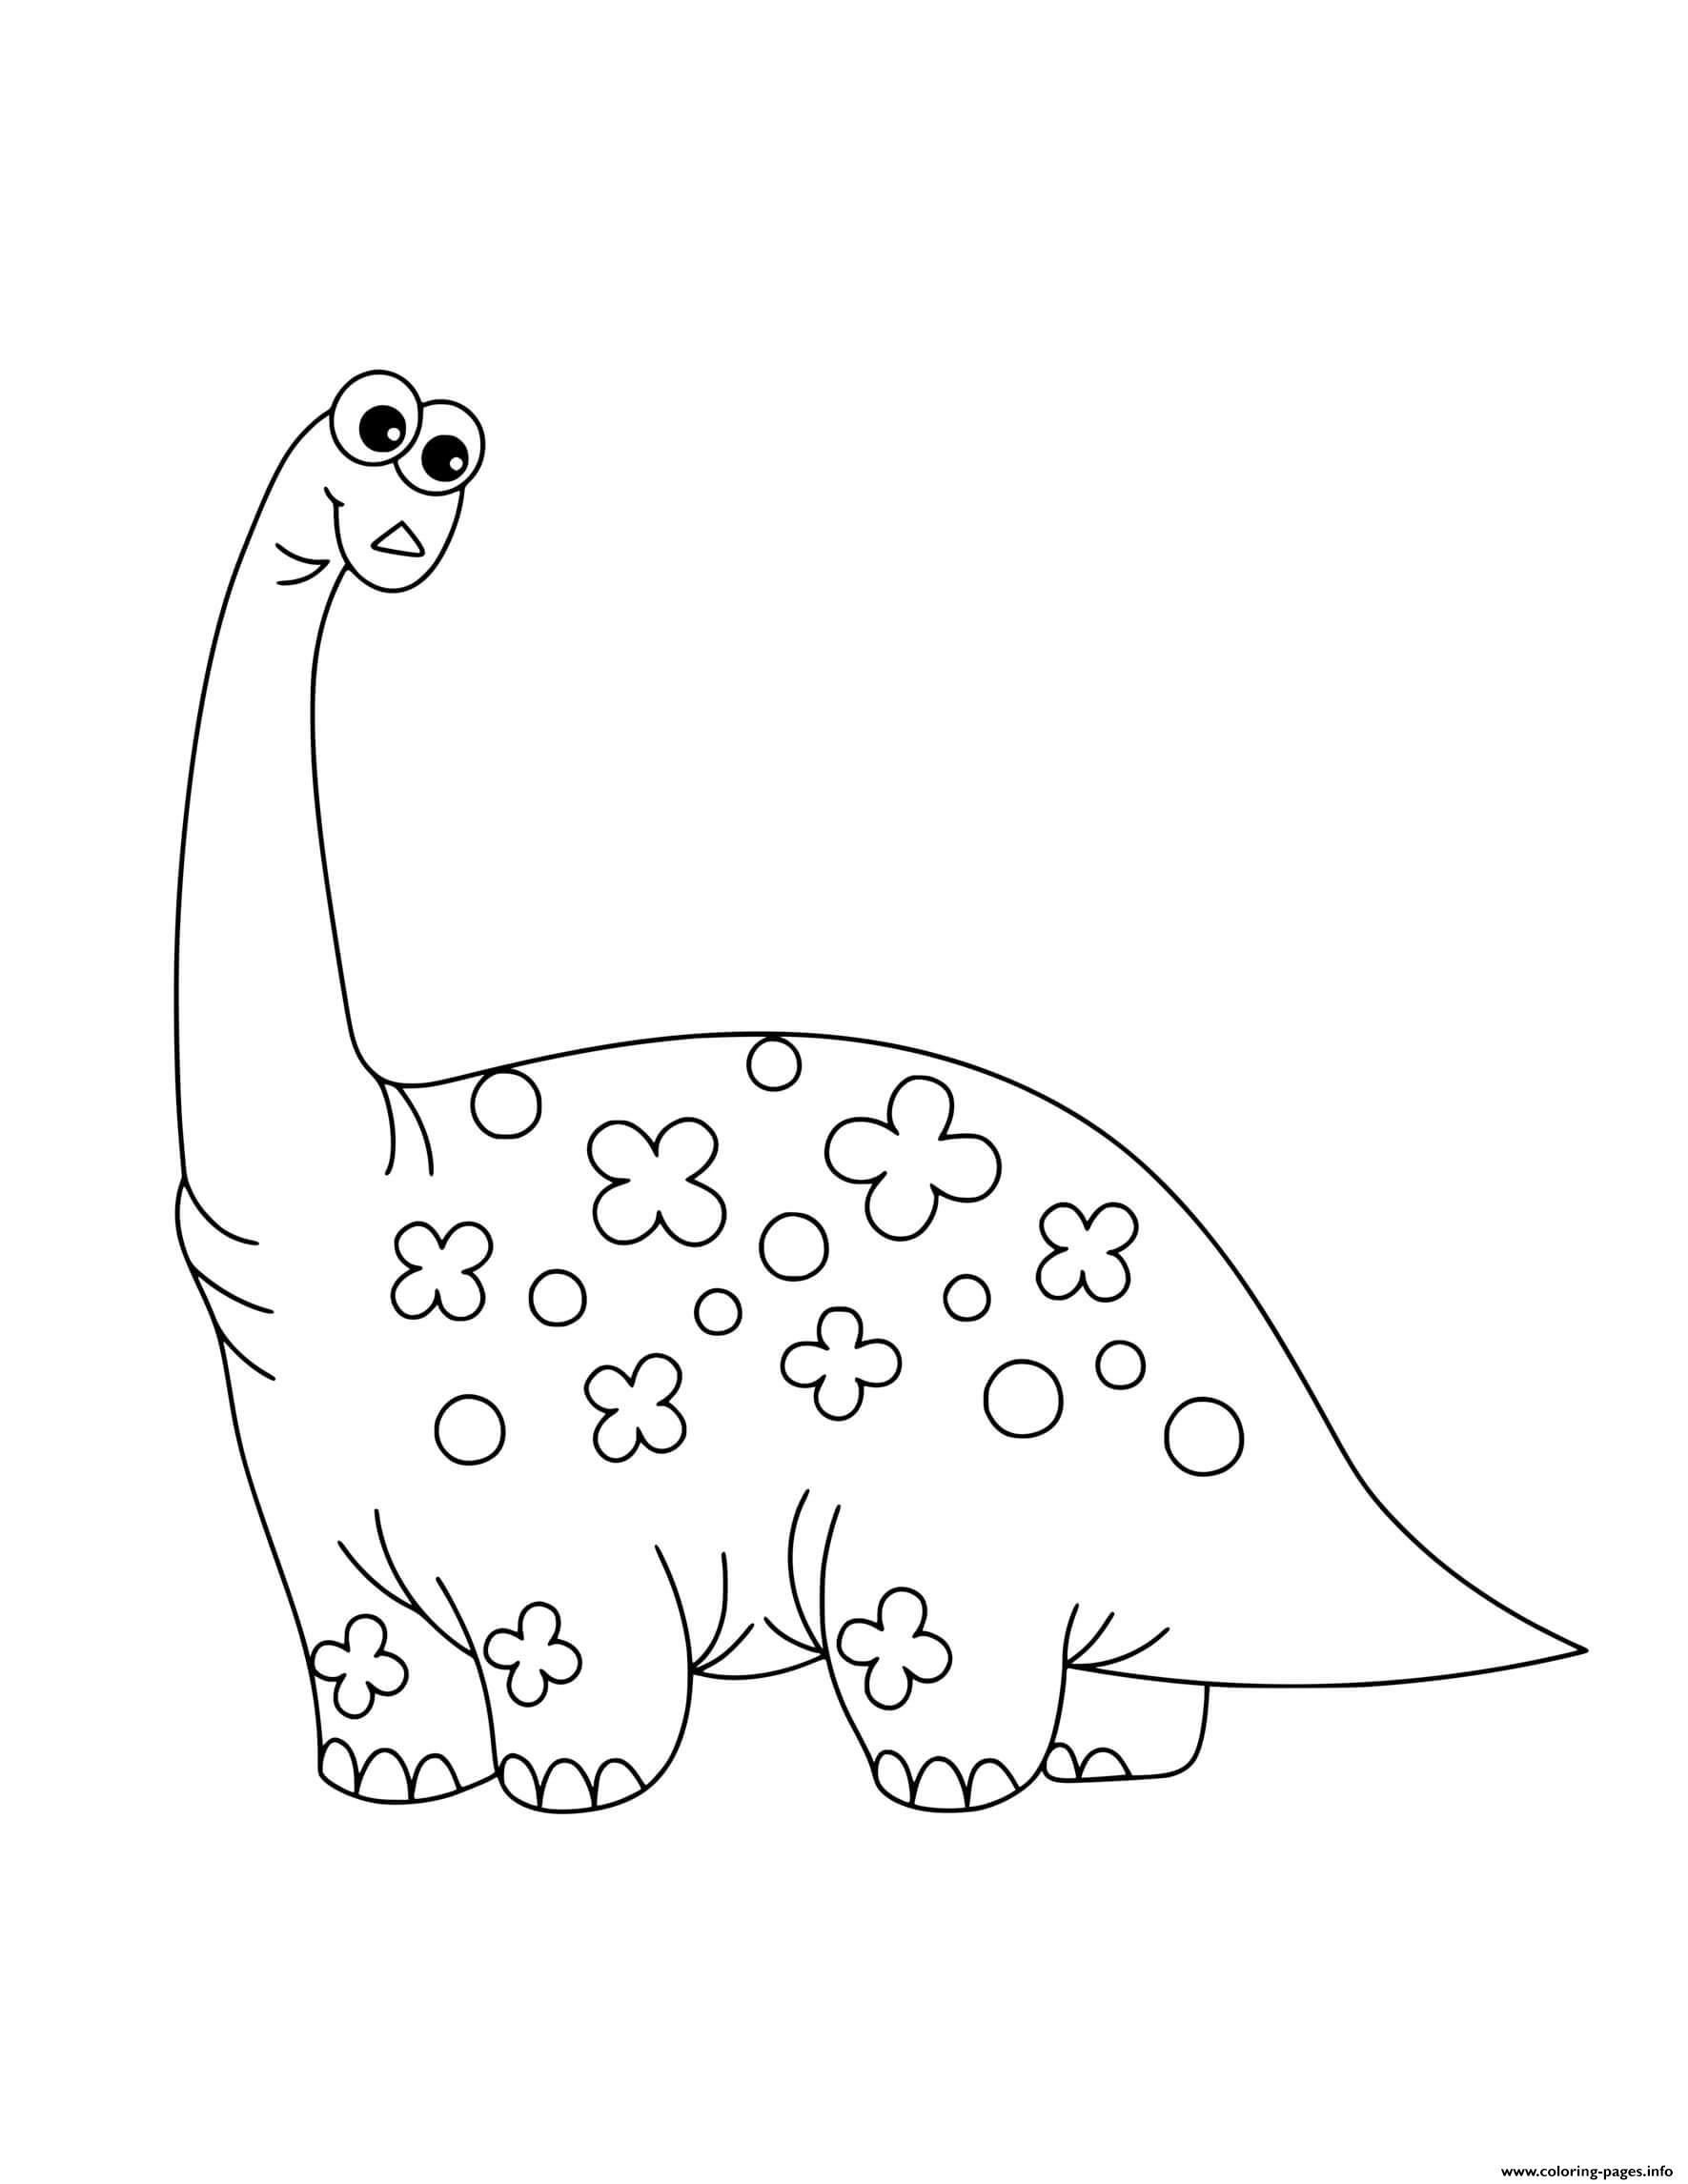 Dinosaur Cute Tall Dinosaur With Flowers For Preschoolers coloring